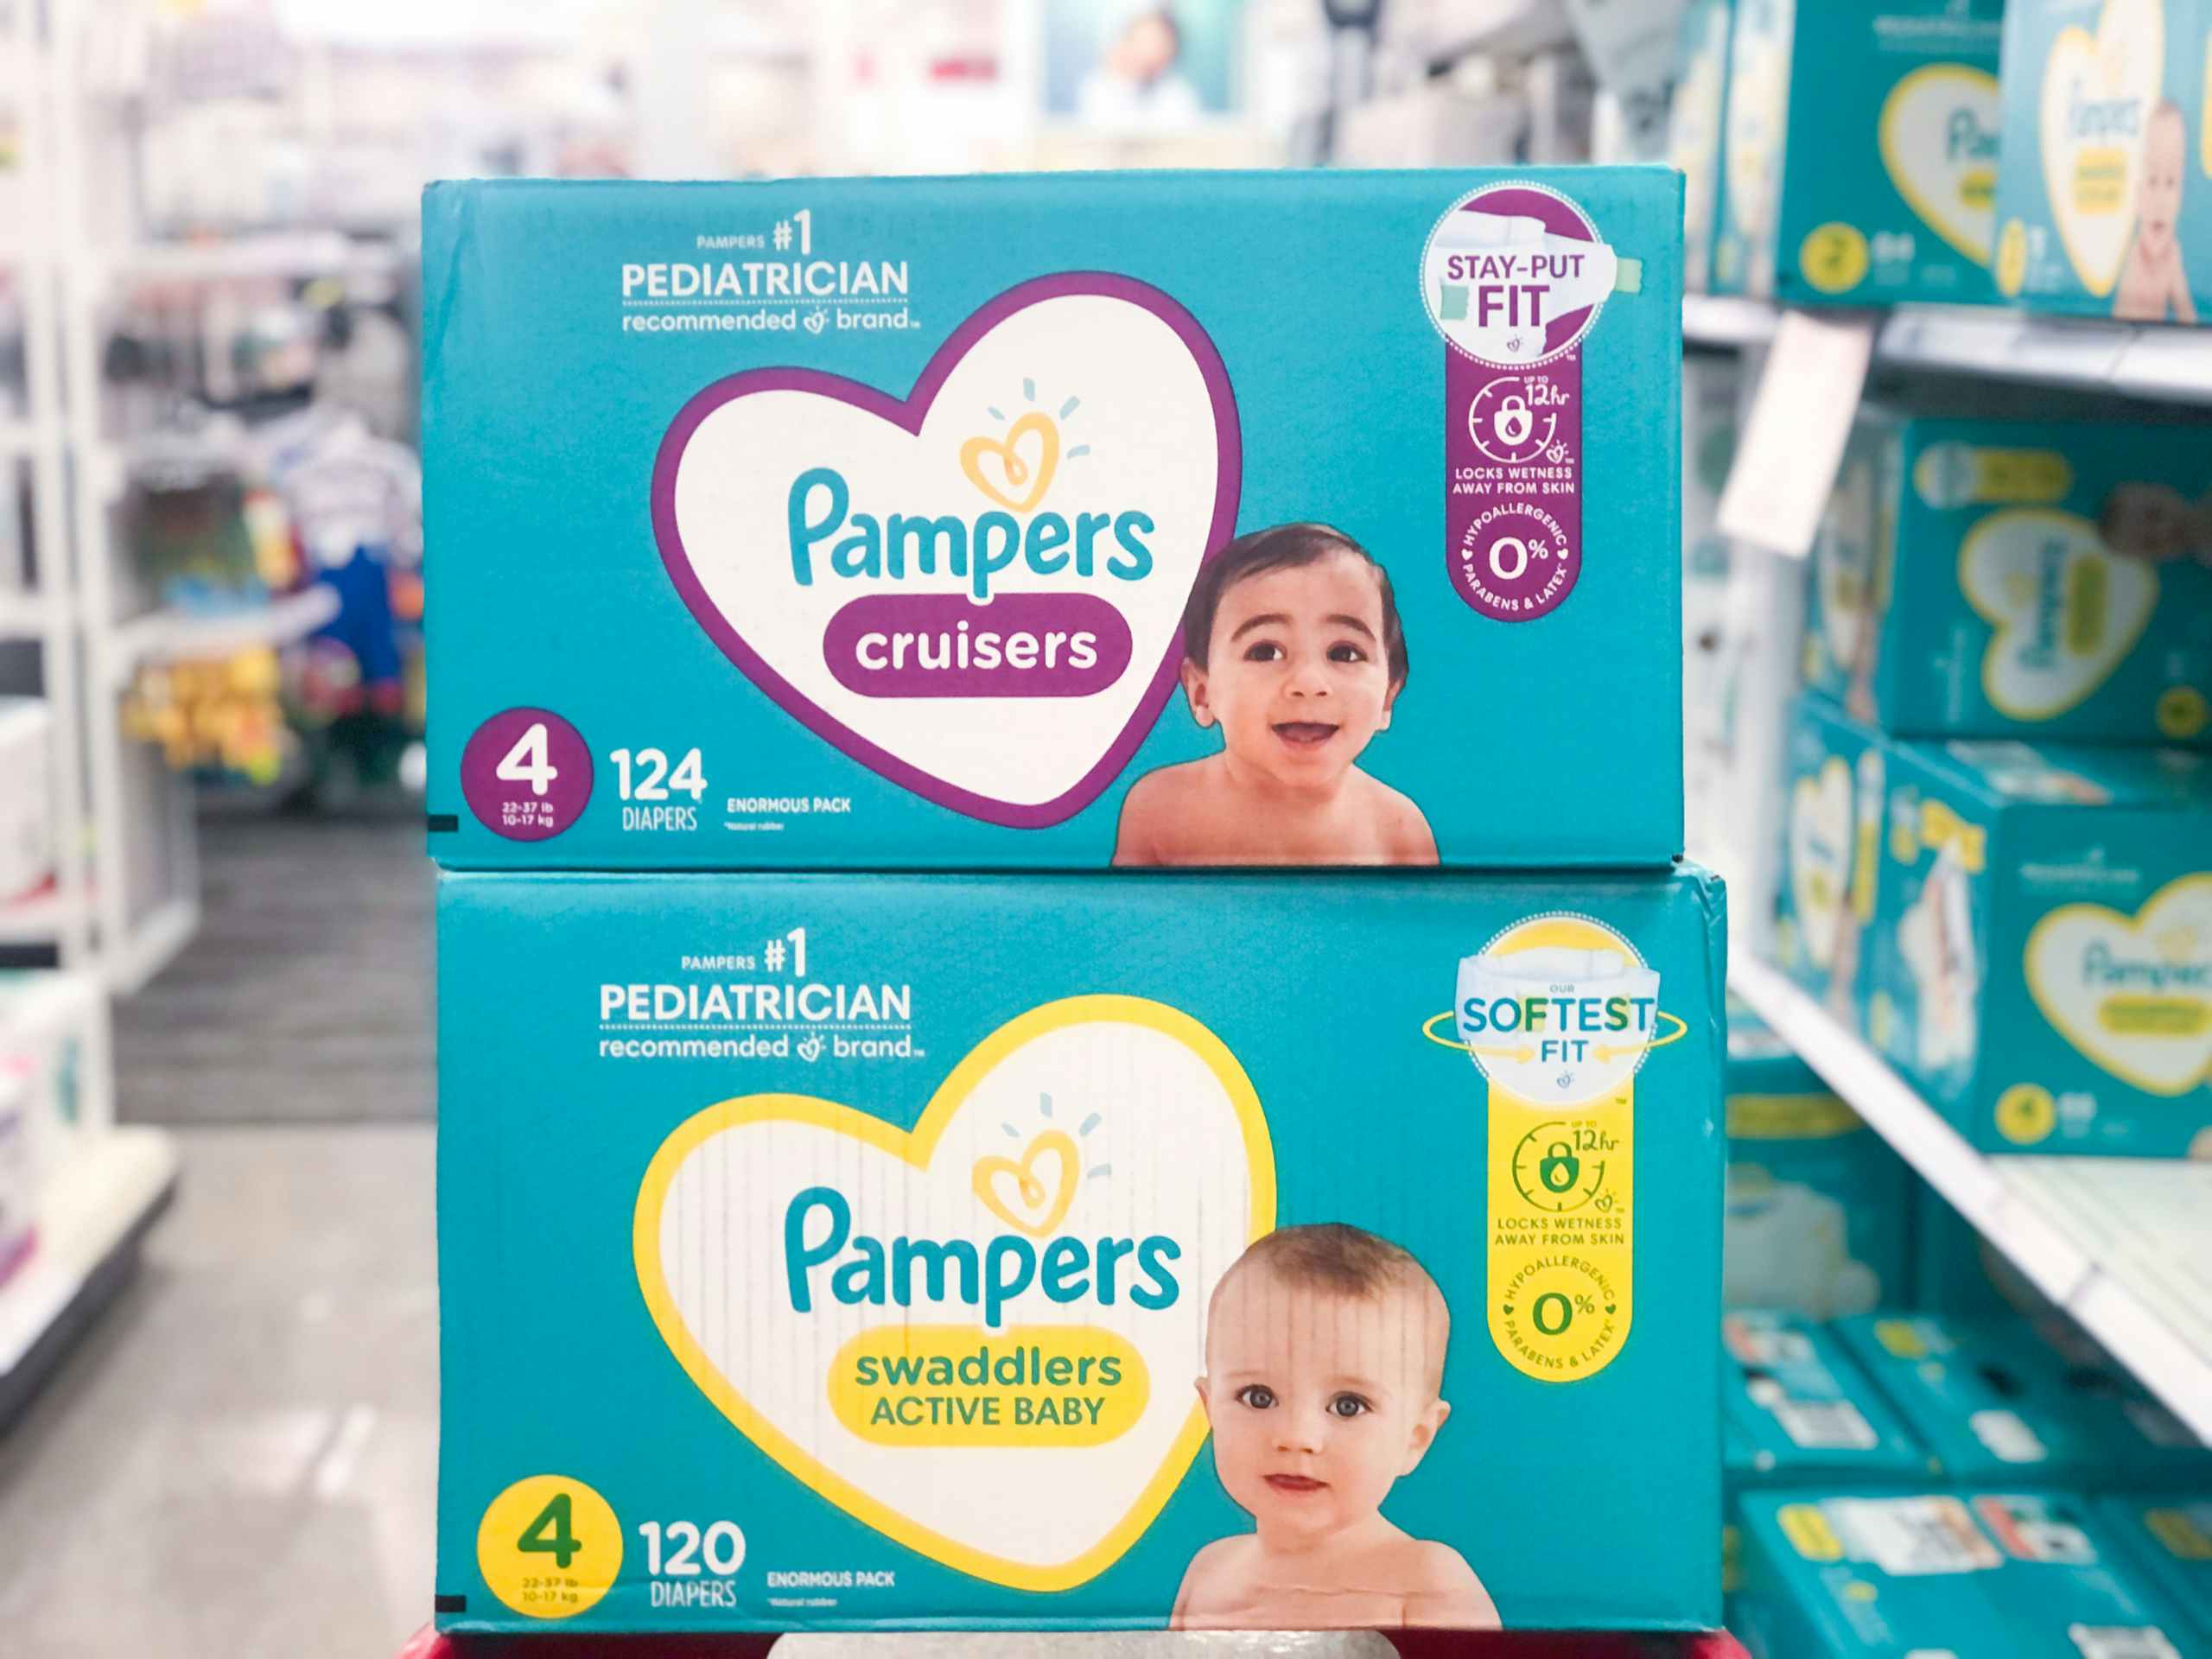 Two boxes of Pampers diapers stacked in an aisle at Target.